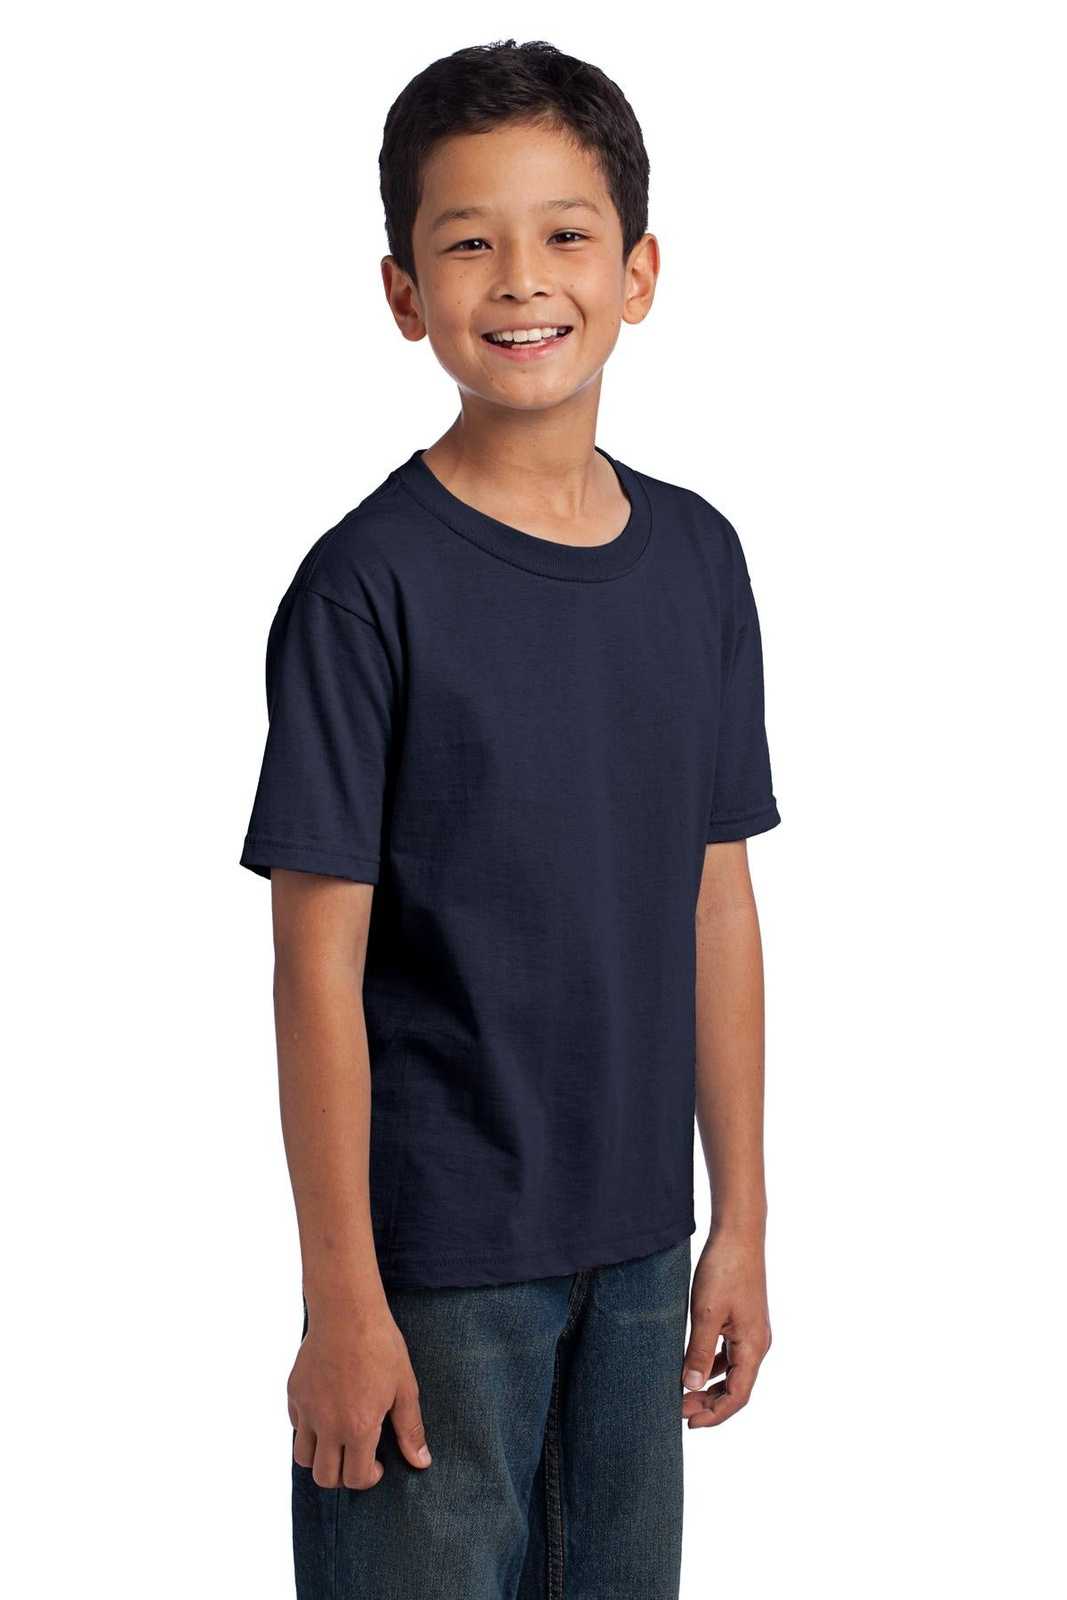 Fruit of the Loom 3930B Youth HD Cotton 100% Cotton T-Shirt - Navy - HIT a Double